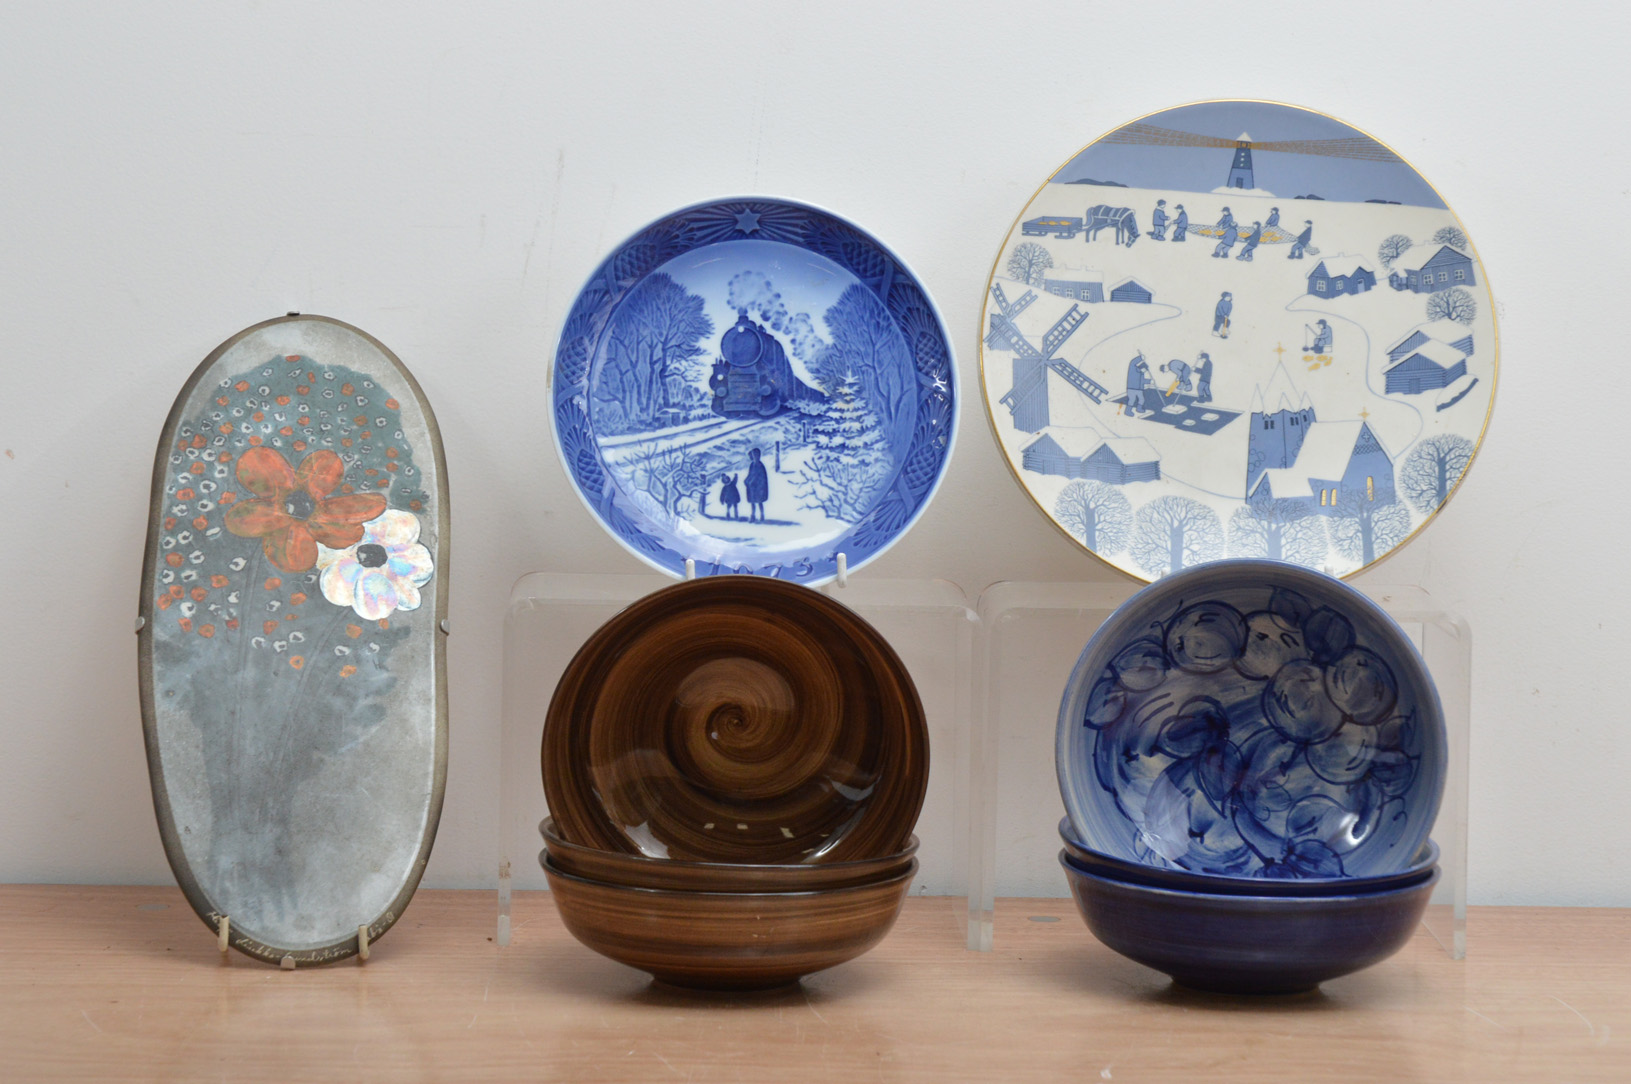 A collection of Finnish ceramic items, comprising six glazed stoneware bowls by Savitorppa, three